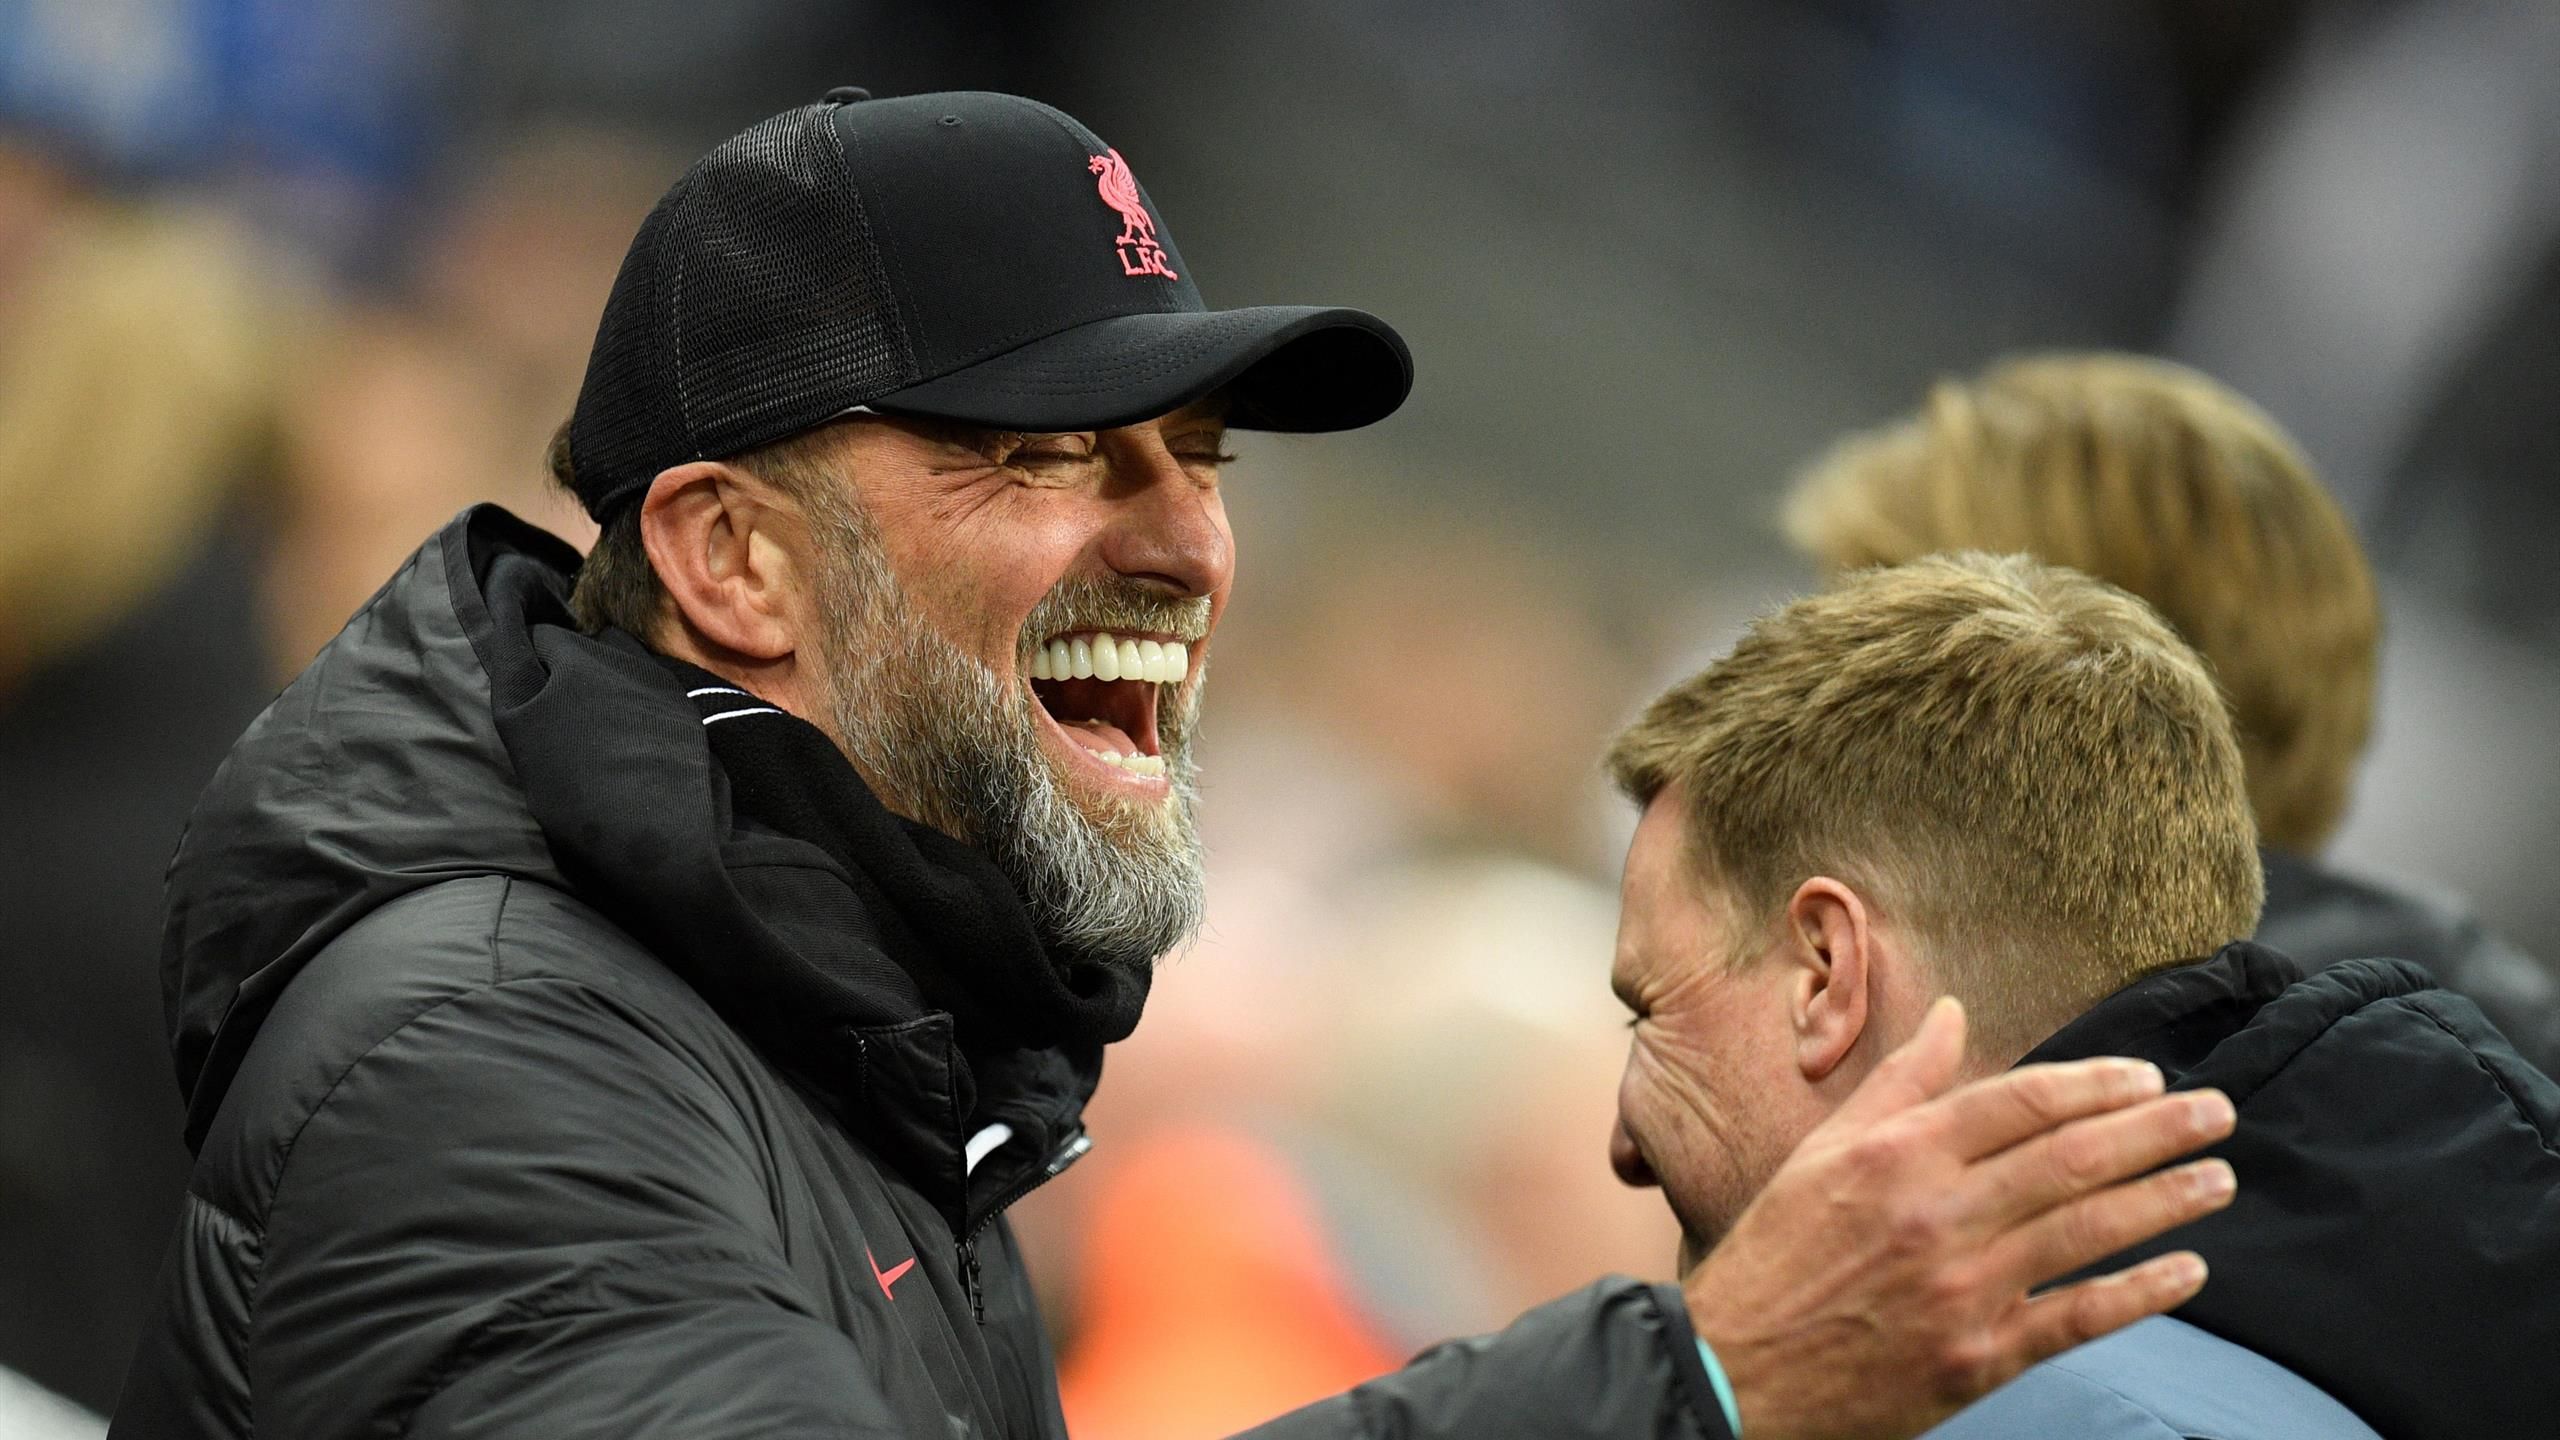 Liverpool's dream Premier League start is gone, and Klopp can't